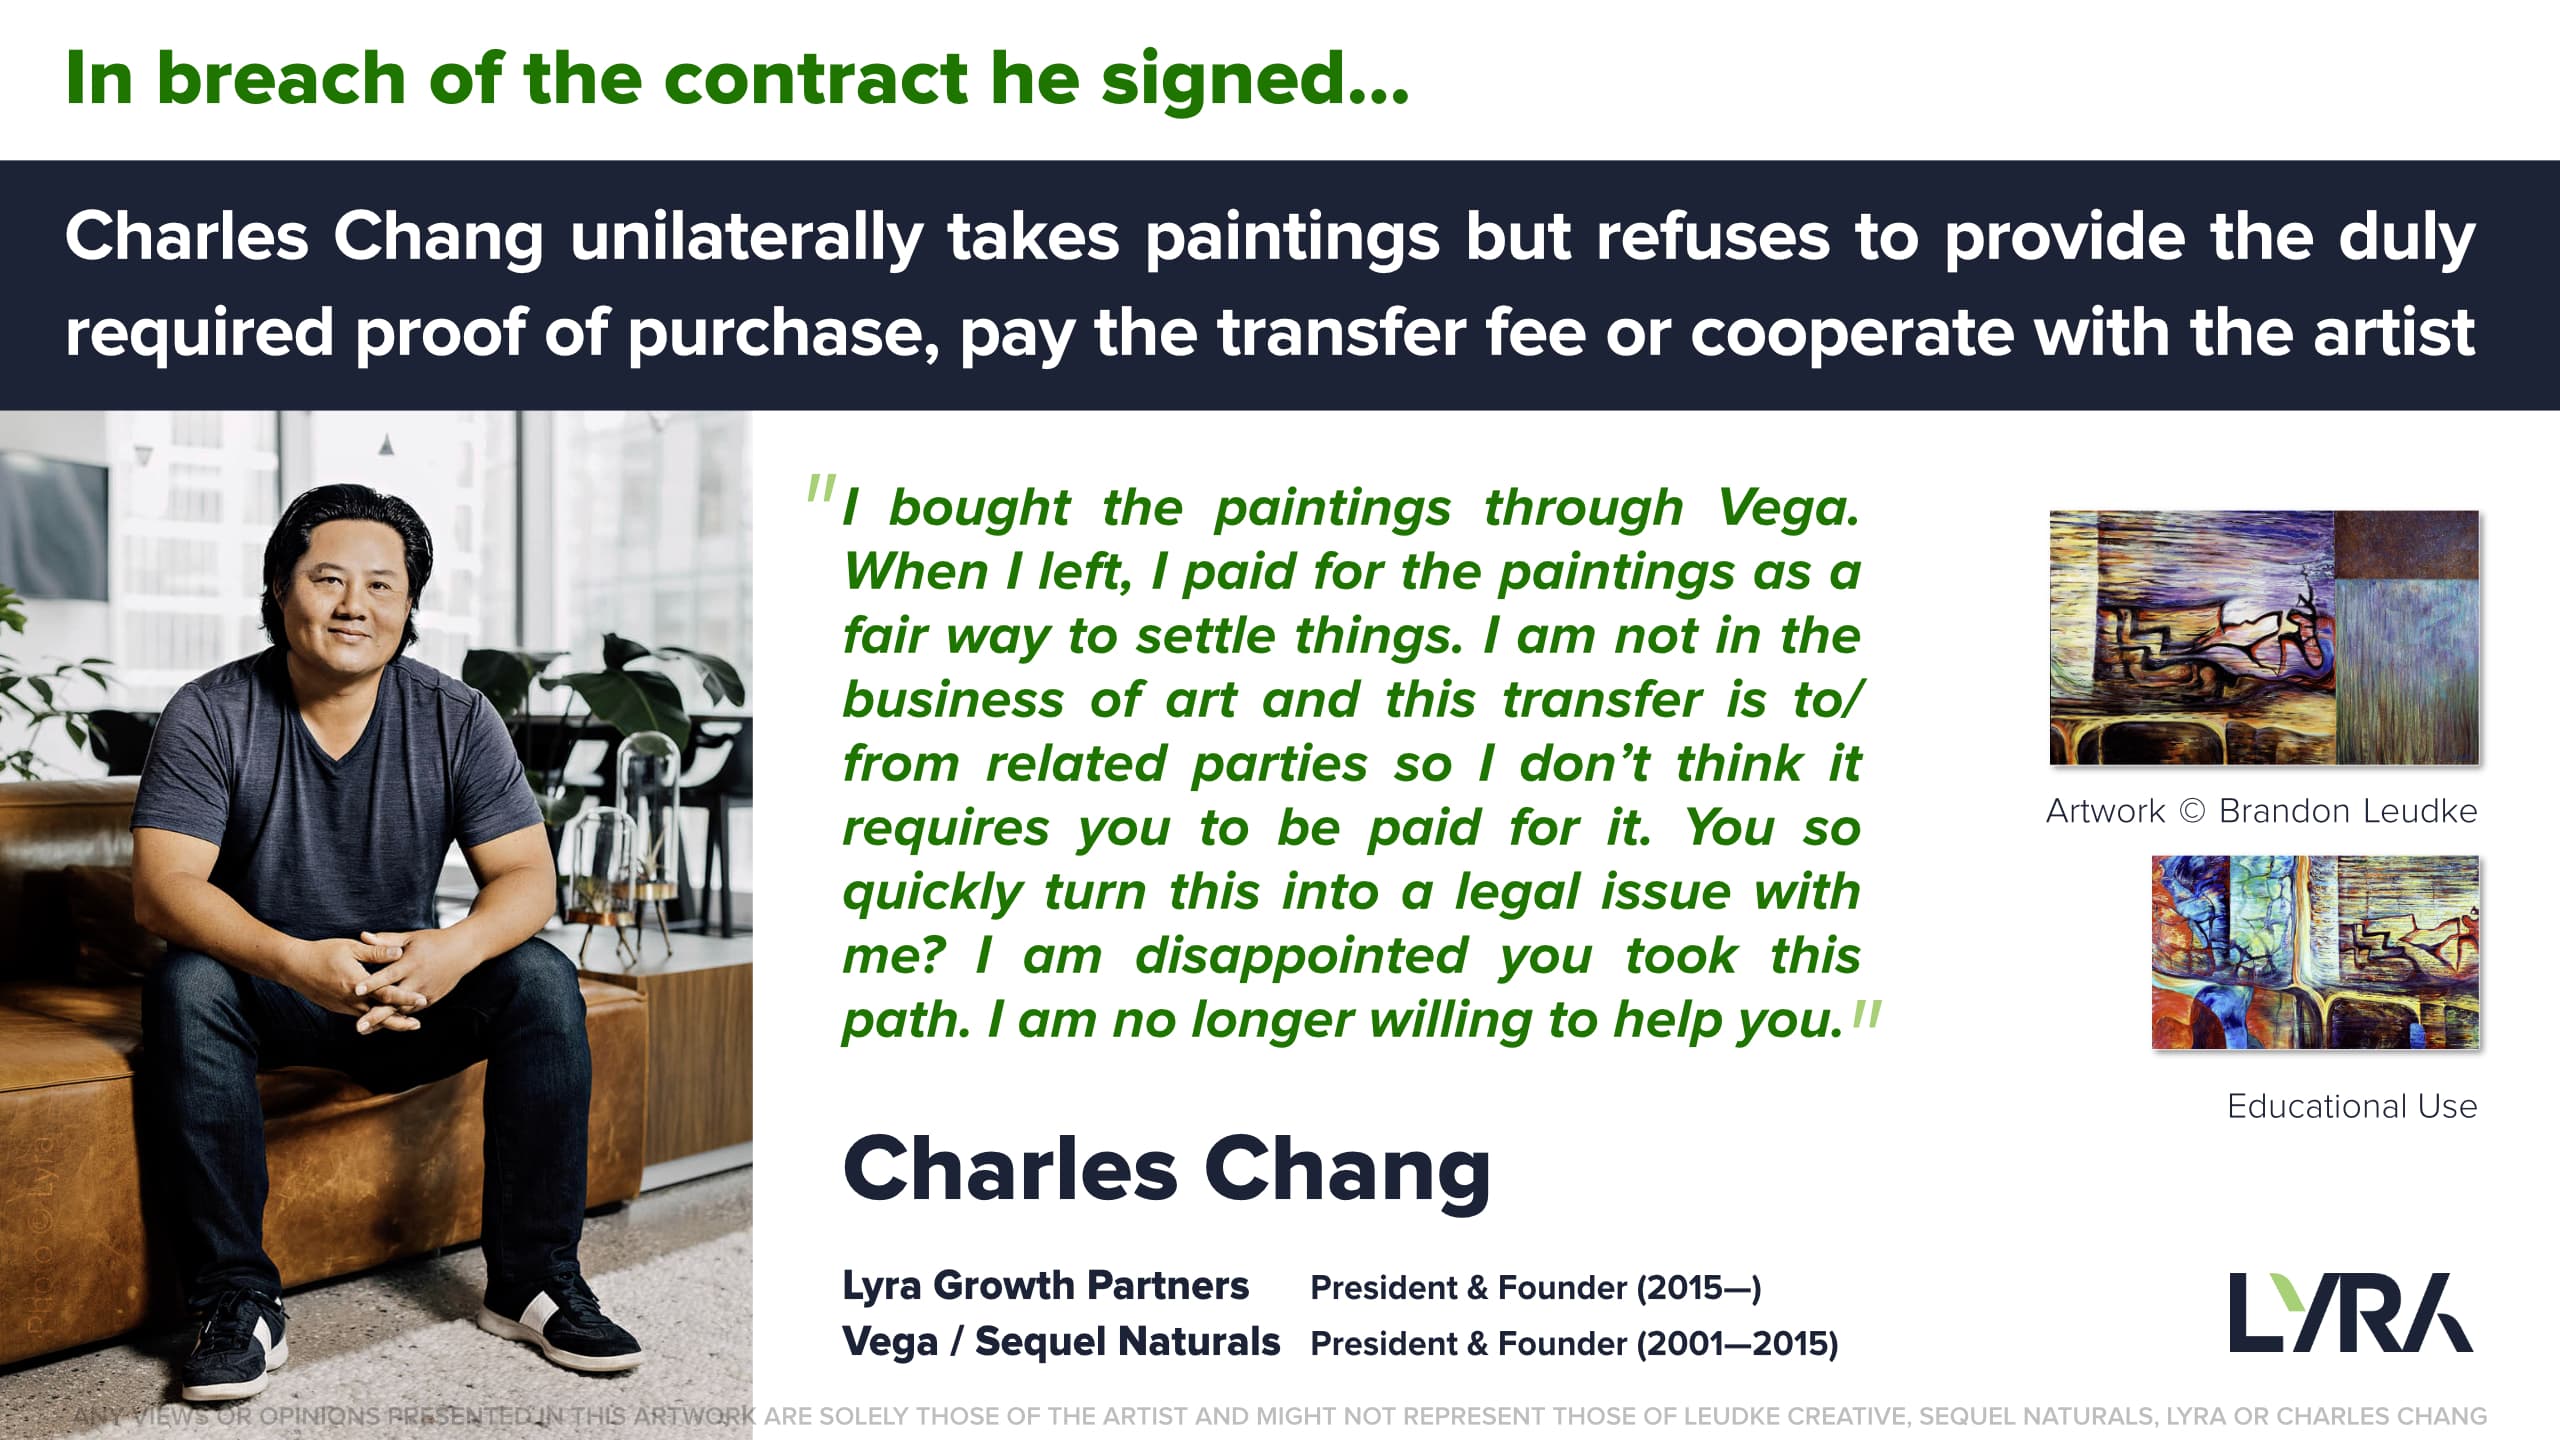 In breach of the contract he signed… Charles Chang unilaterally takes paintings but refuses to provide the duly required proof of purchase, pay the transfer fee or cooperate with the artist